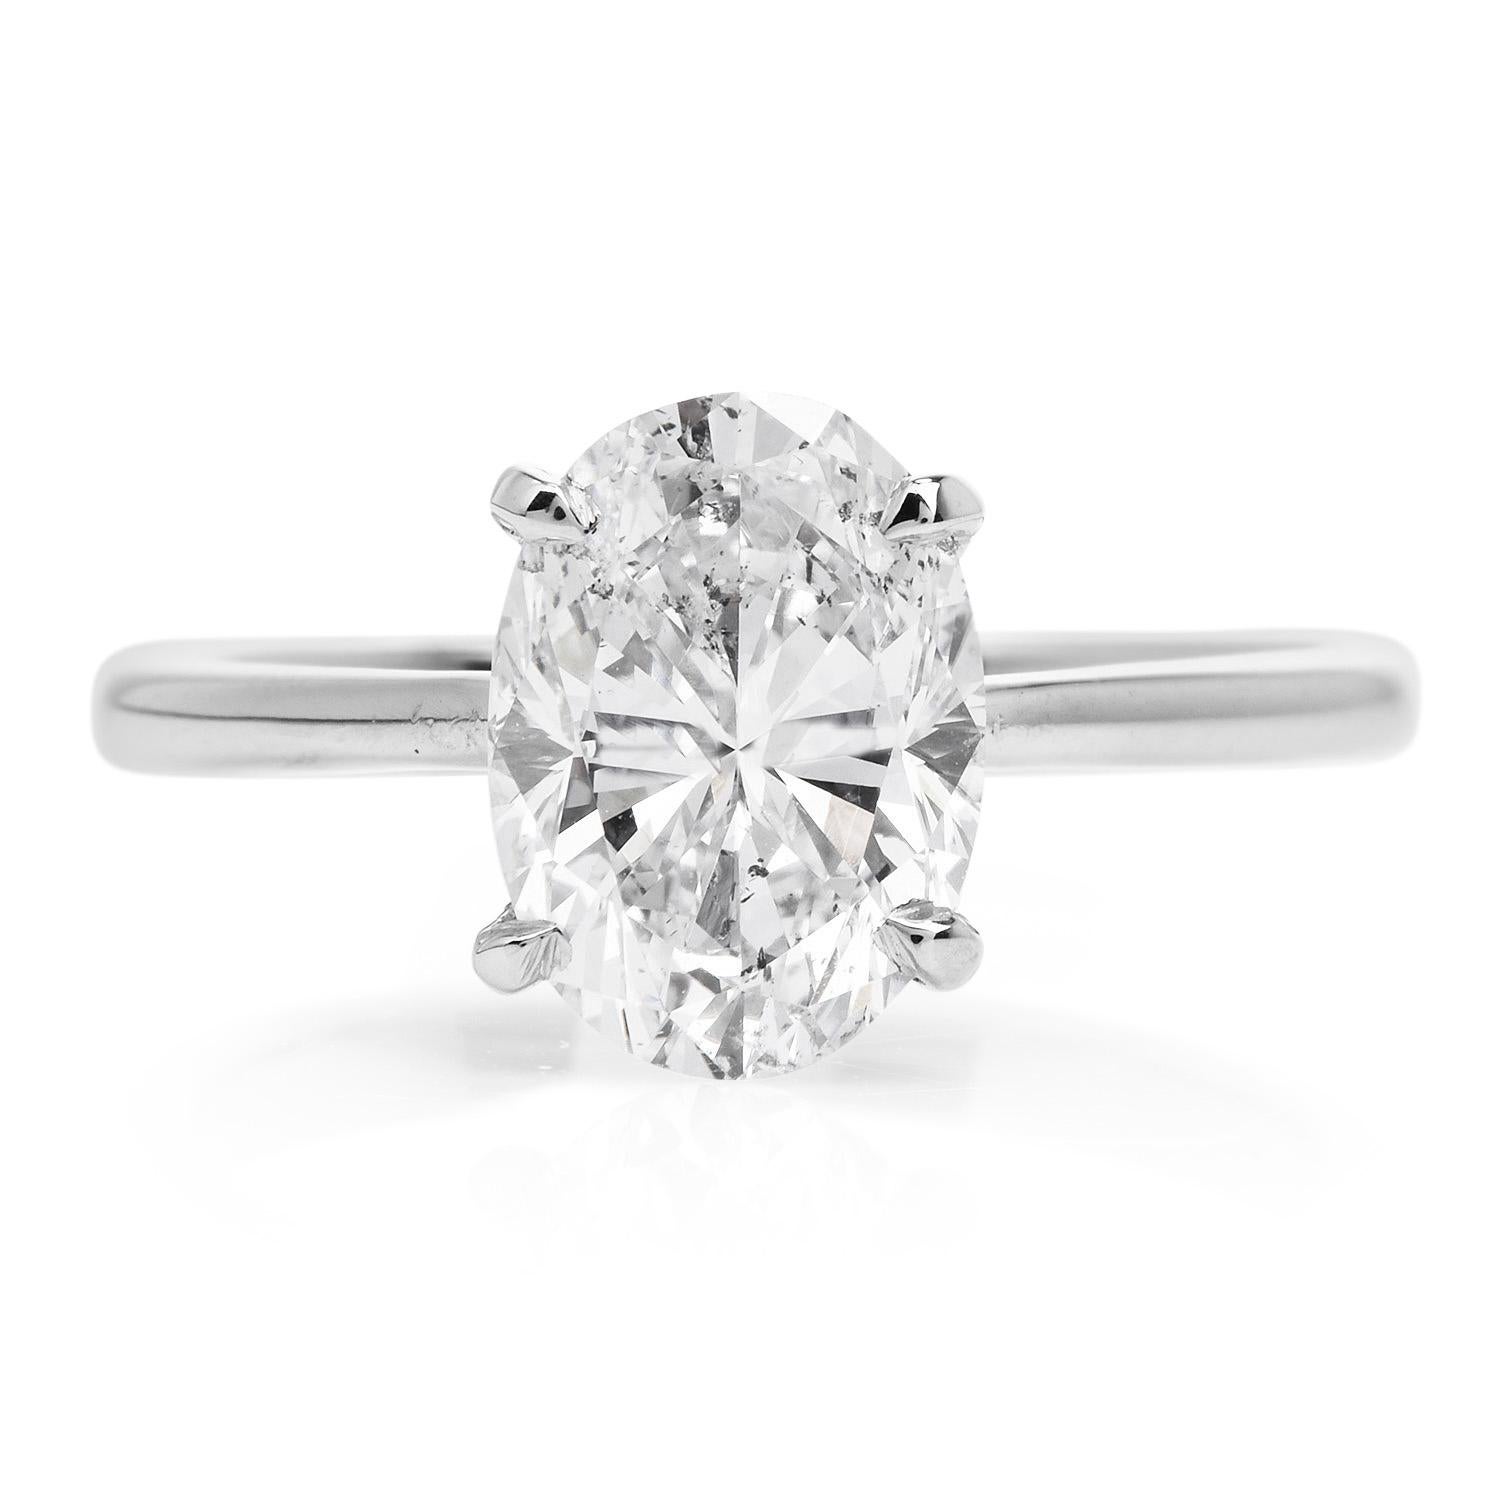 GIA 2.61 Ct Oval Cut E Color Diamond White Gold Solitaire Engagement Ring In Excellent Condition For Sale In Miami, FL